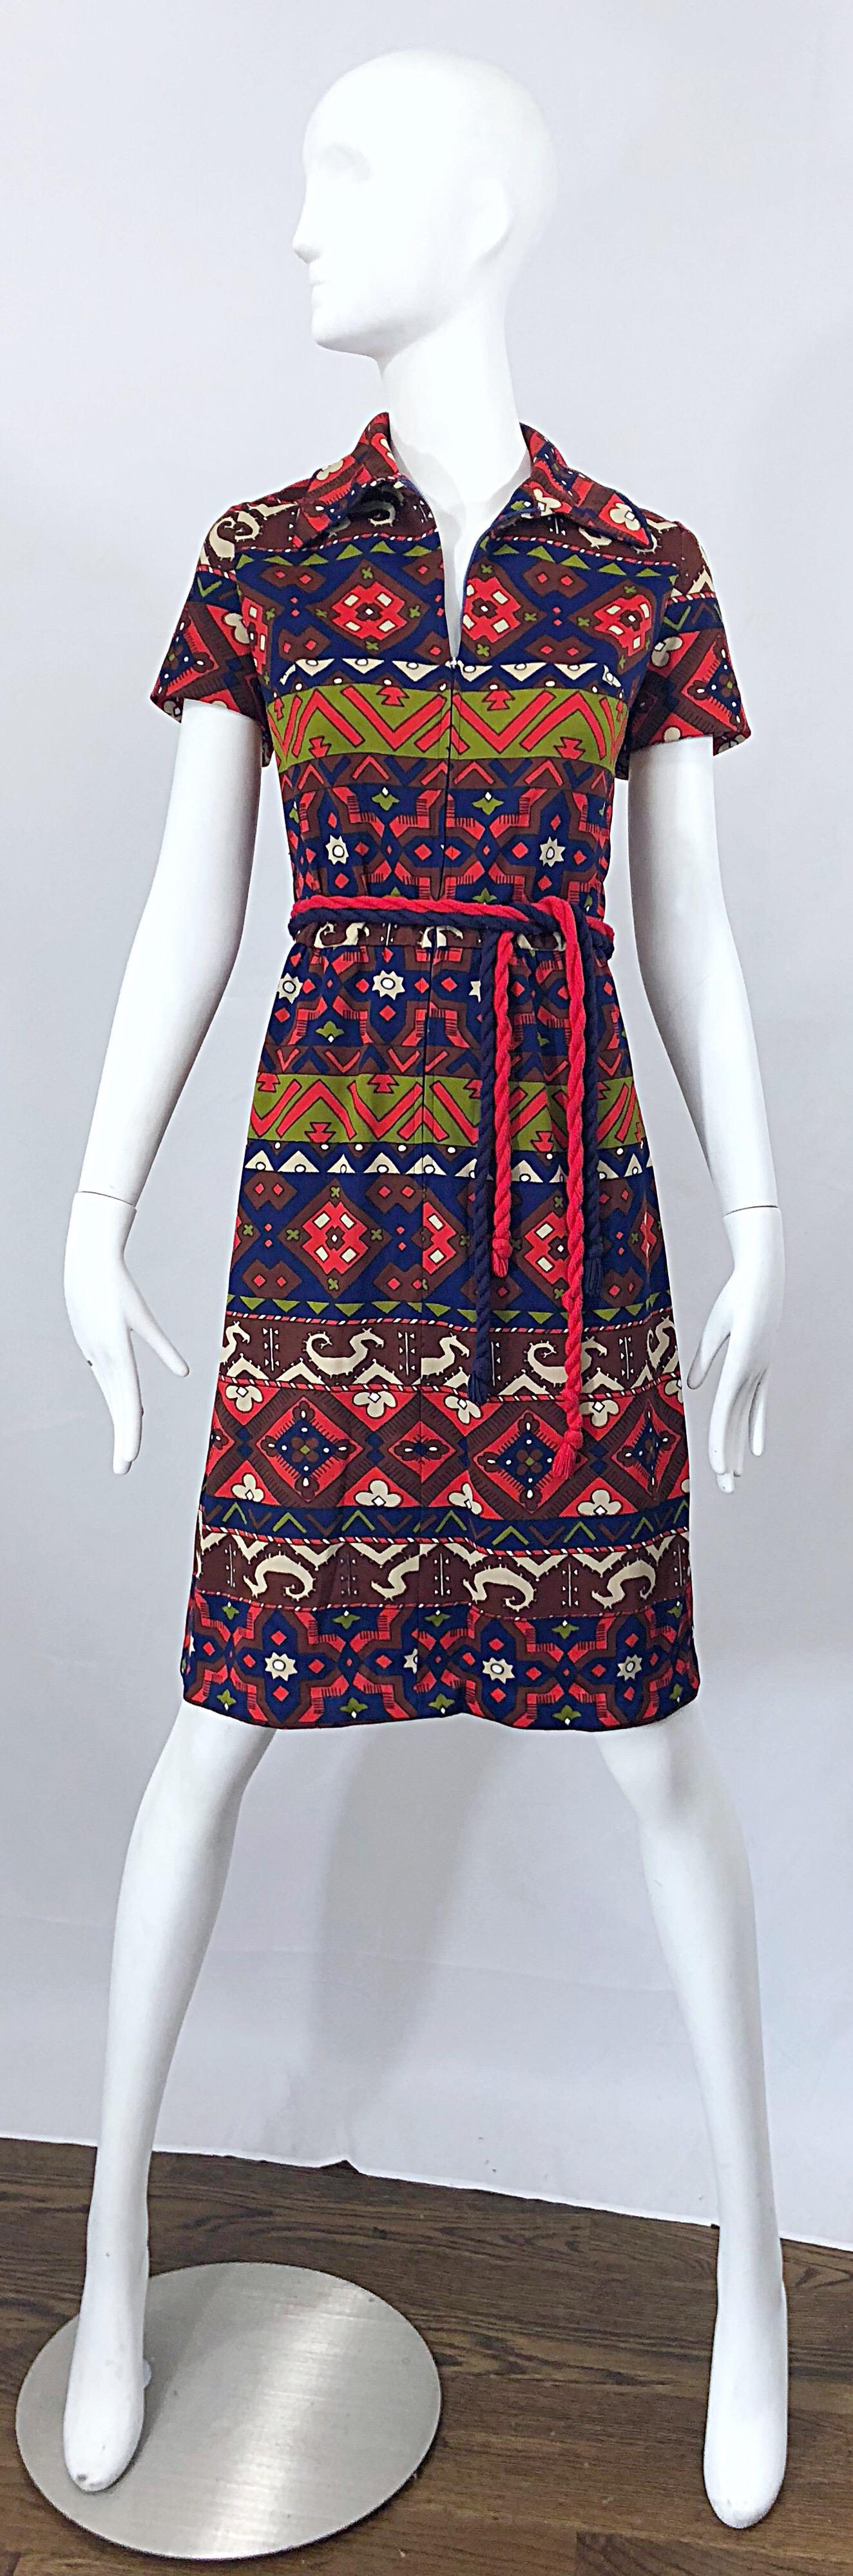 1970s Aztec Novelty Print Amazing Vintage 70s Knit Rope Belted Shirt Dress For Sale 8